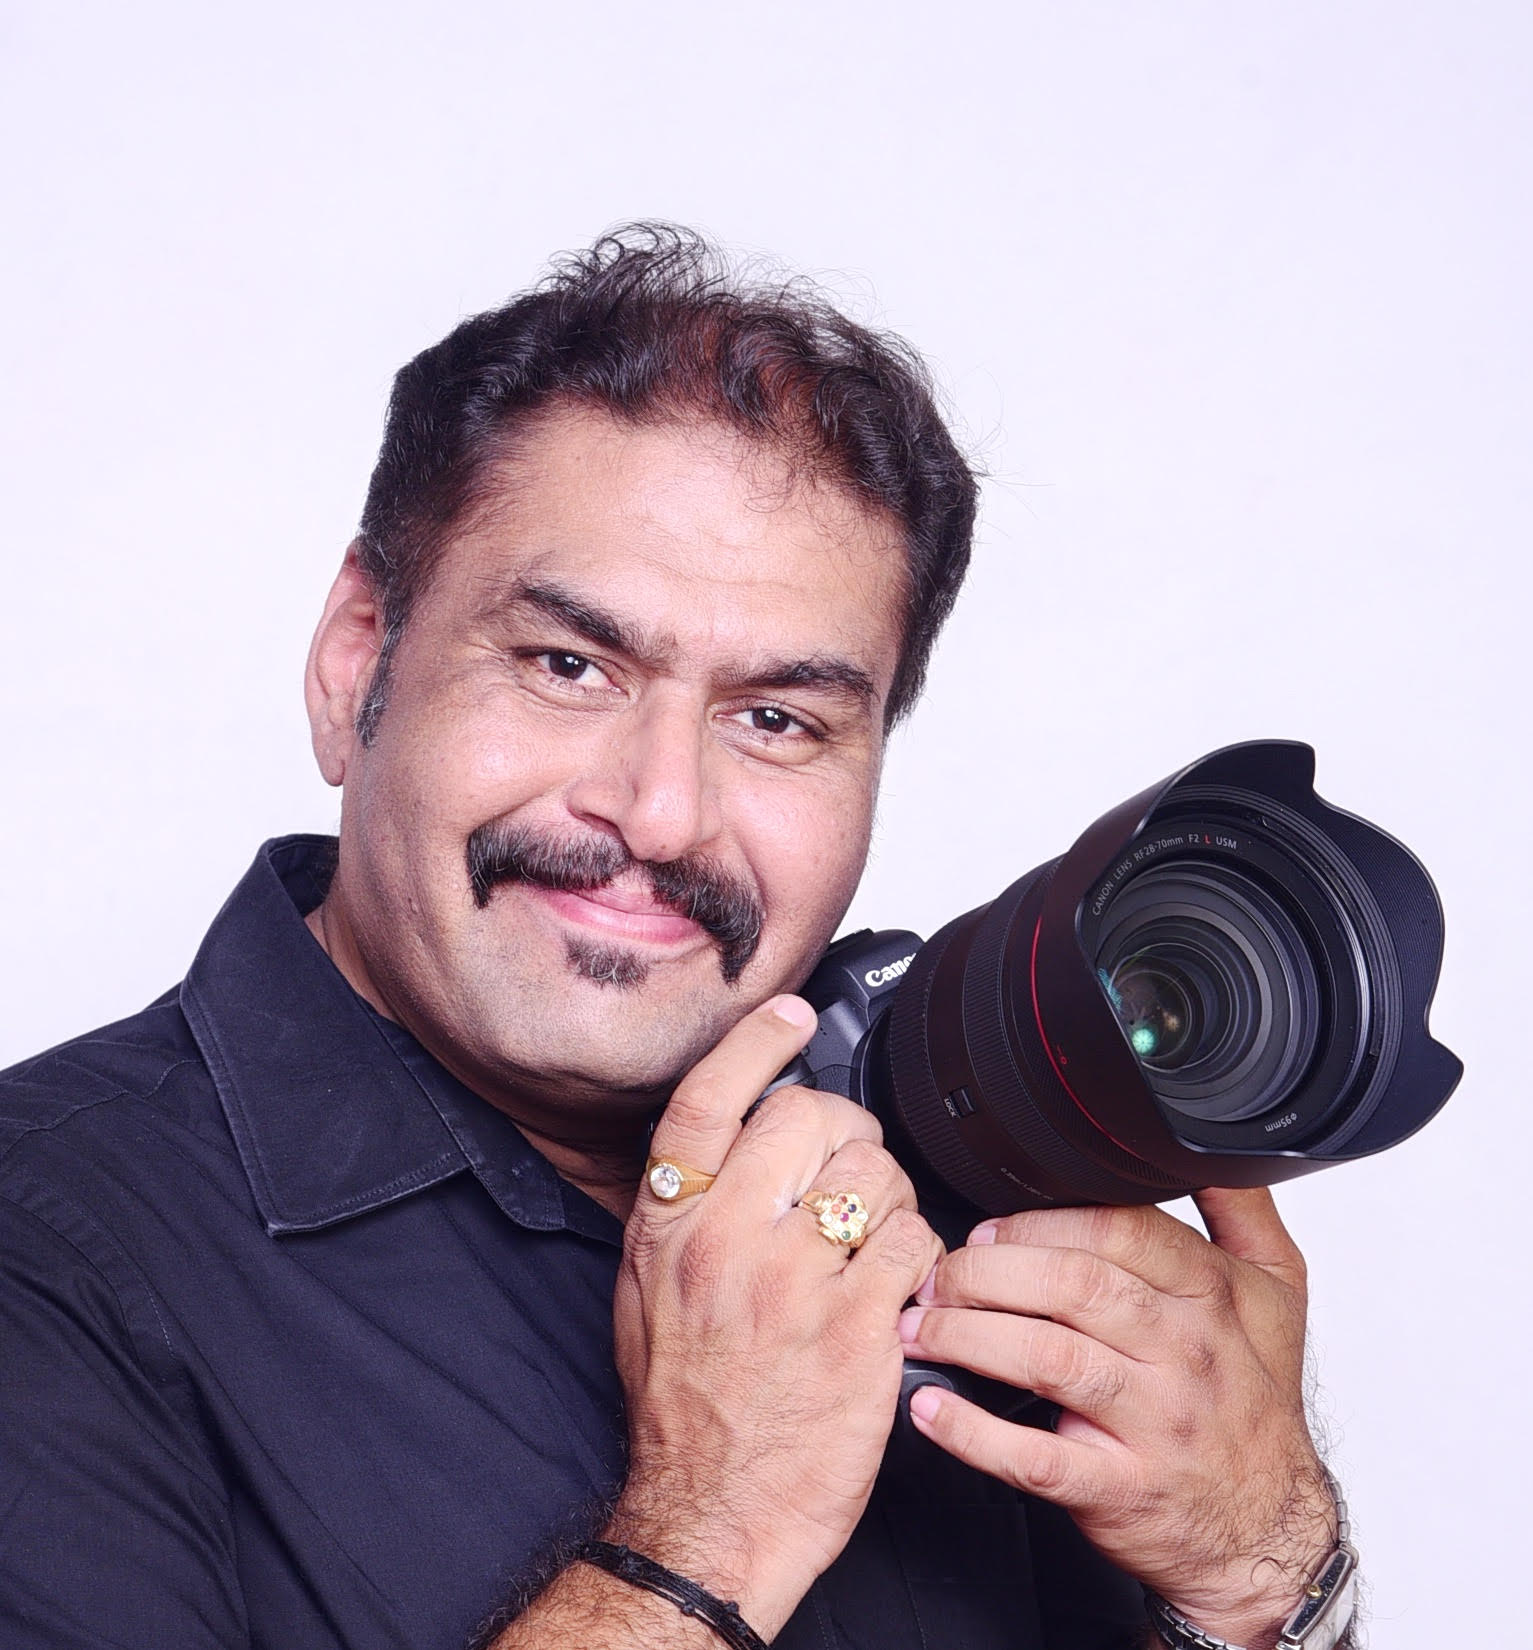 Astro Mohan has bags the Honorary Excellence of United States Photographic Alliance Fellowship for the year 2020